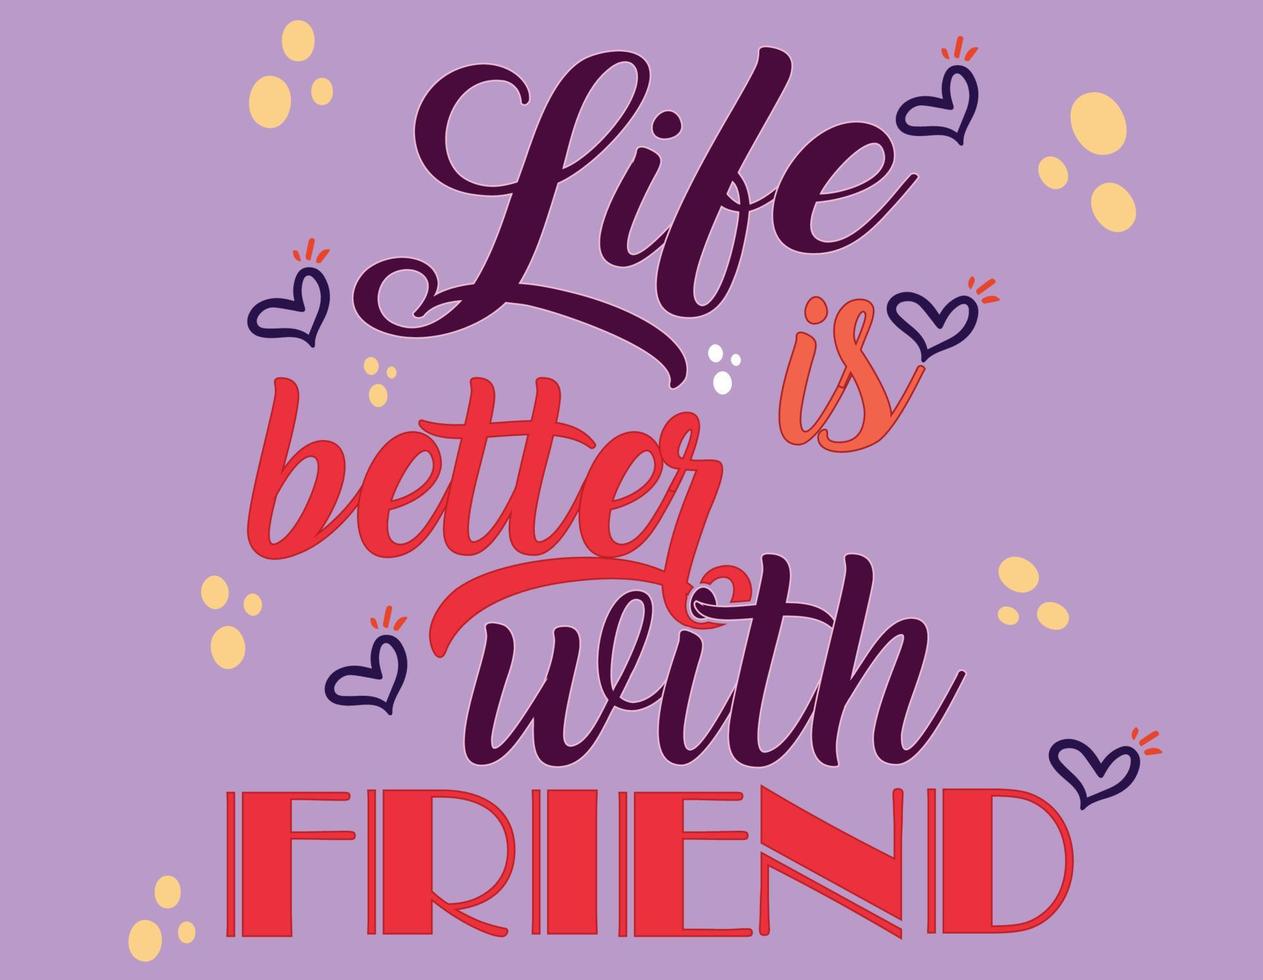 Life is better with friends, Just because Cards & Quotes